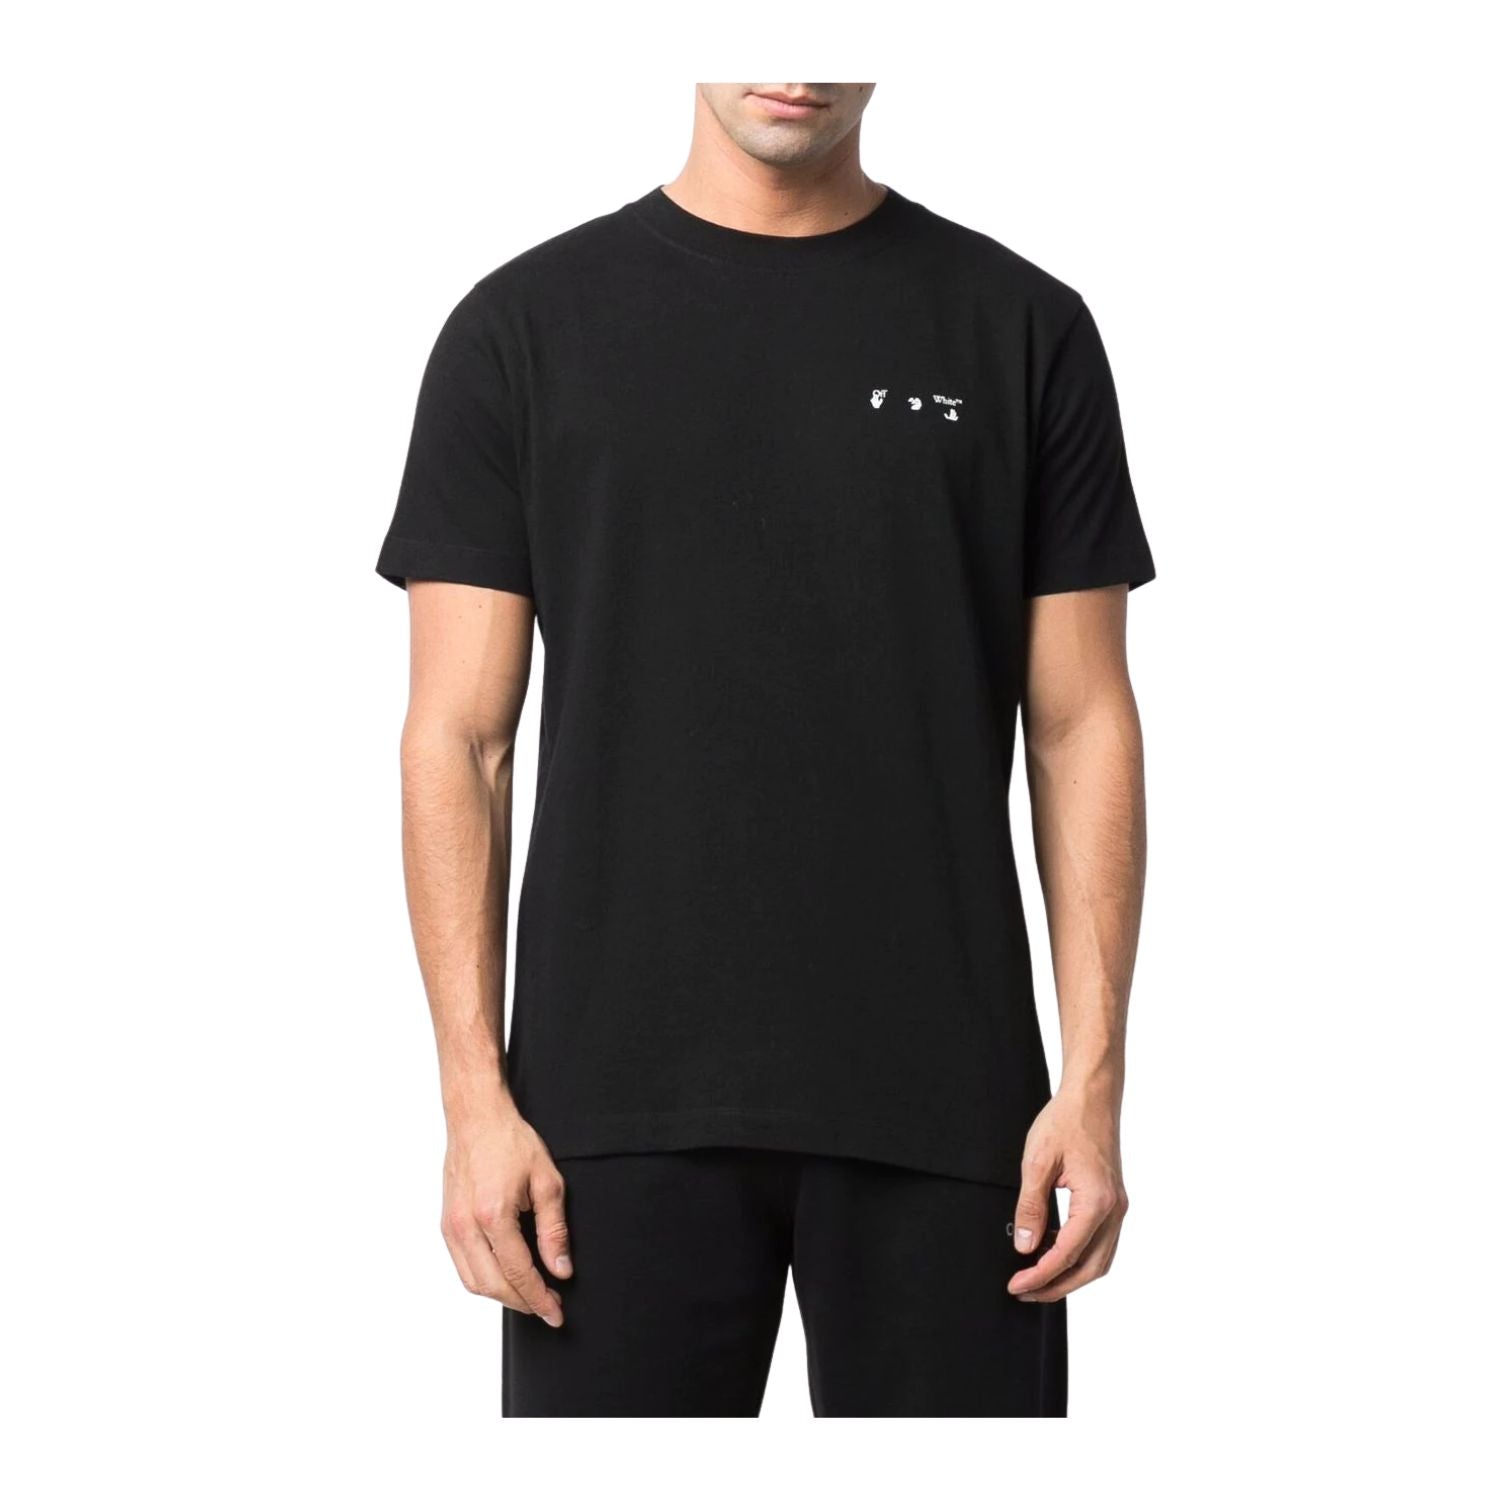 Off-white Caravag Paint Slim S/s Tee Mens Style : Omaa027c99jer00